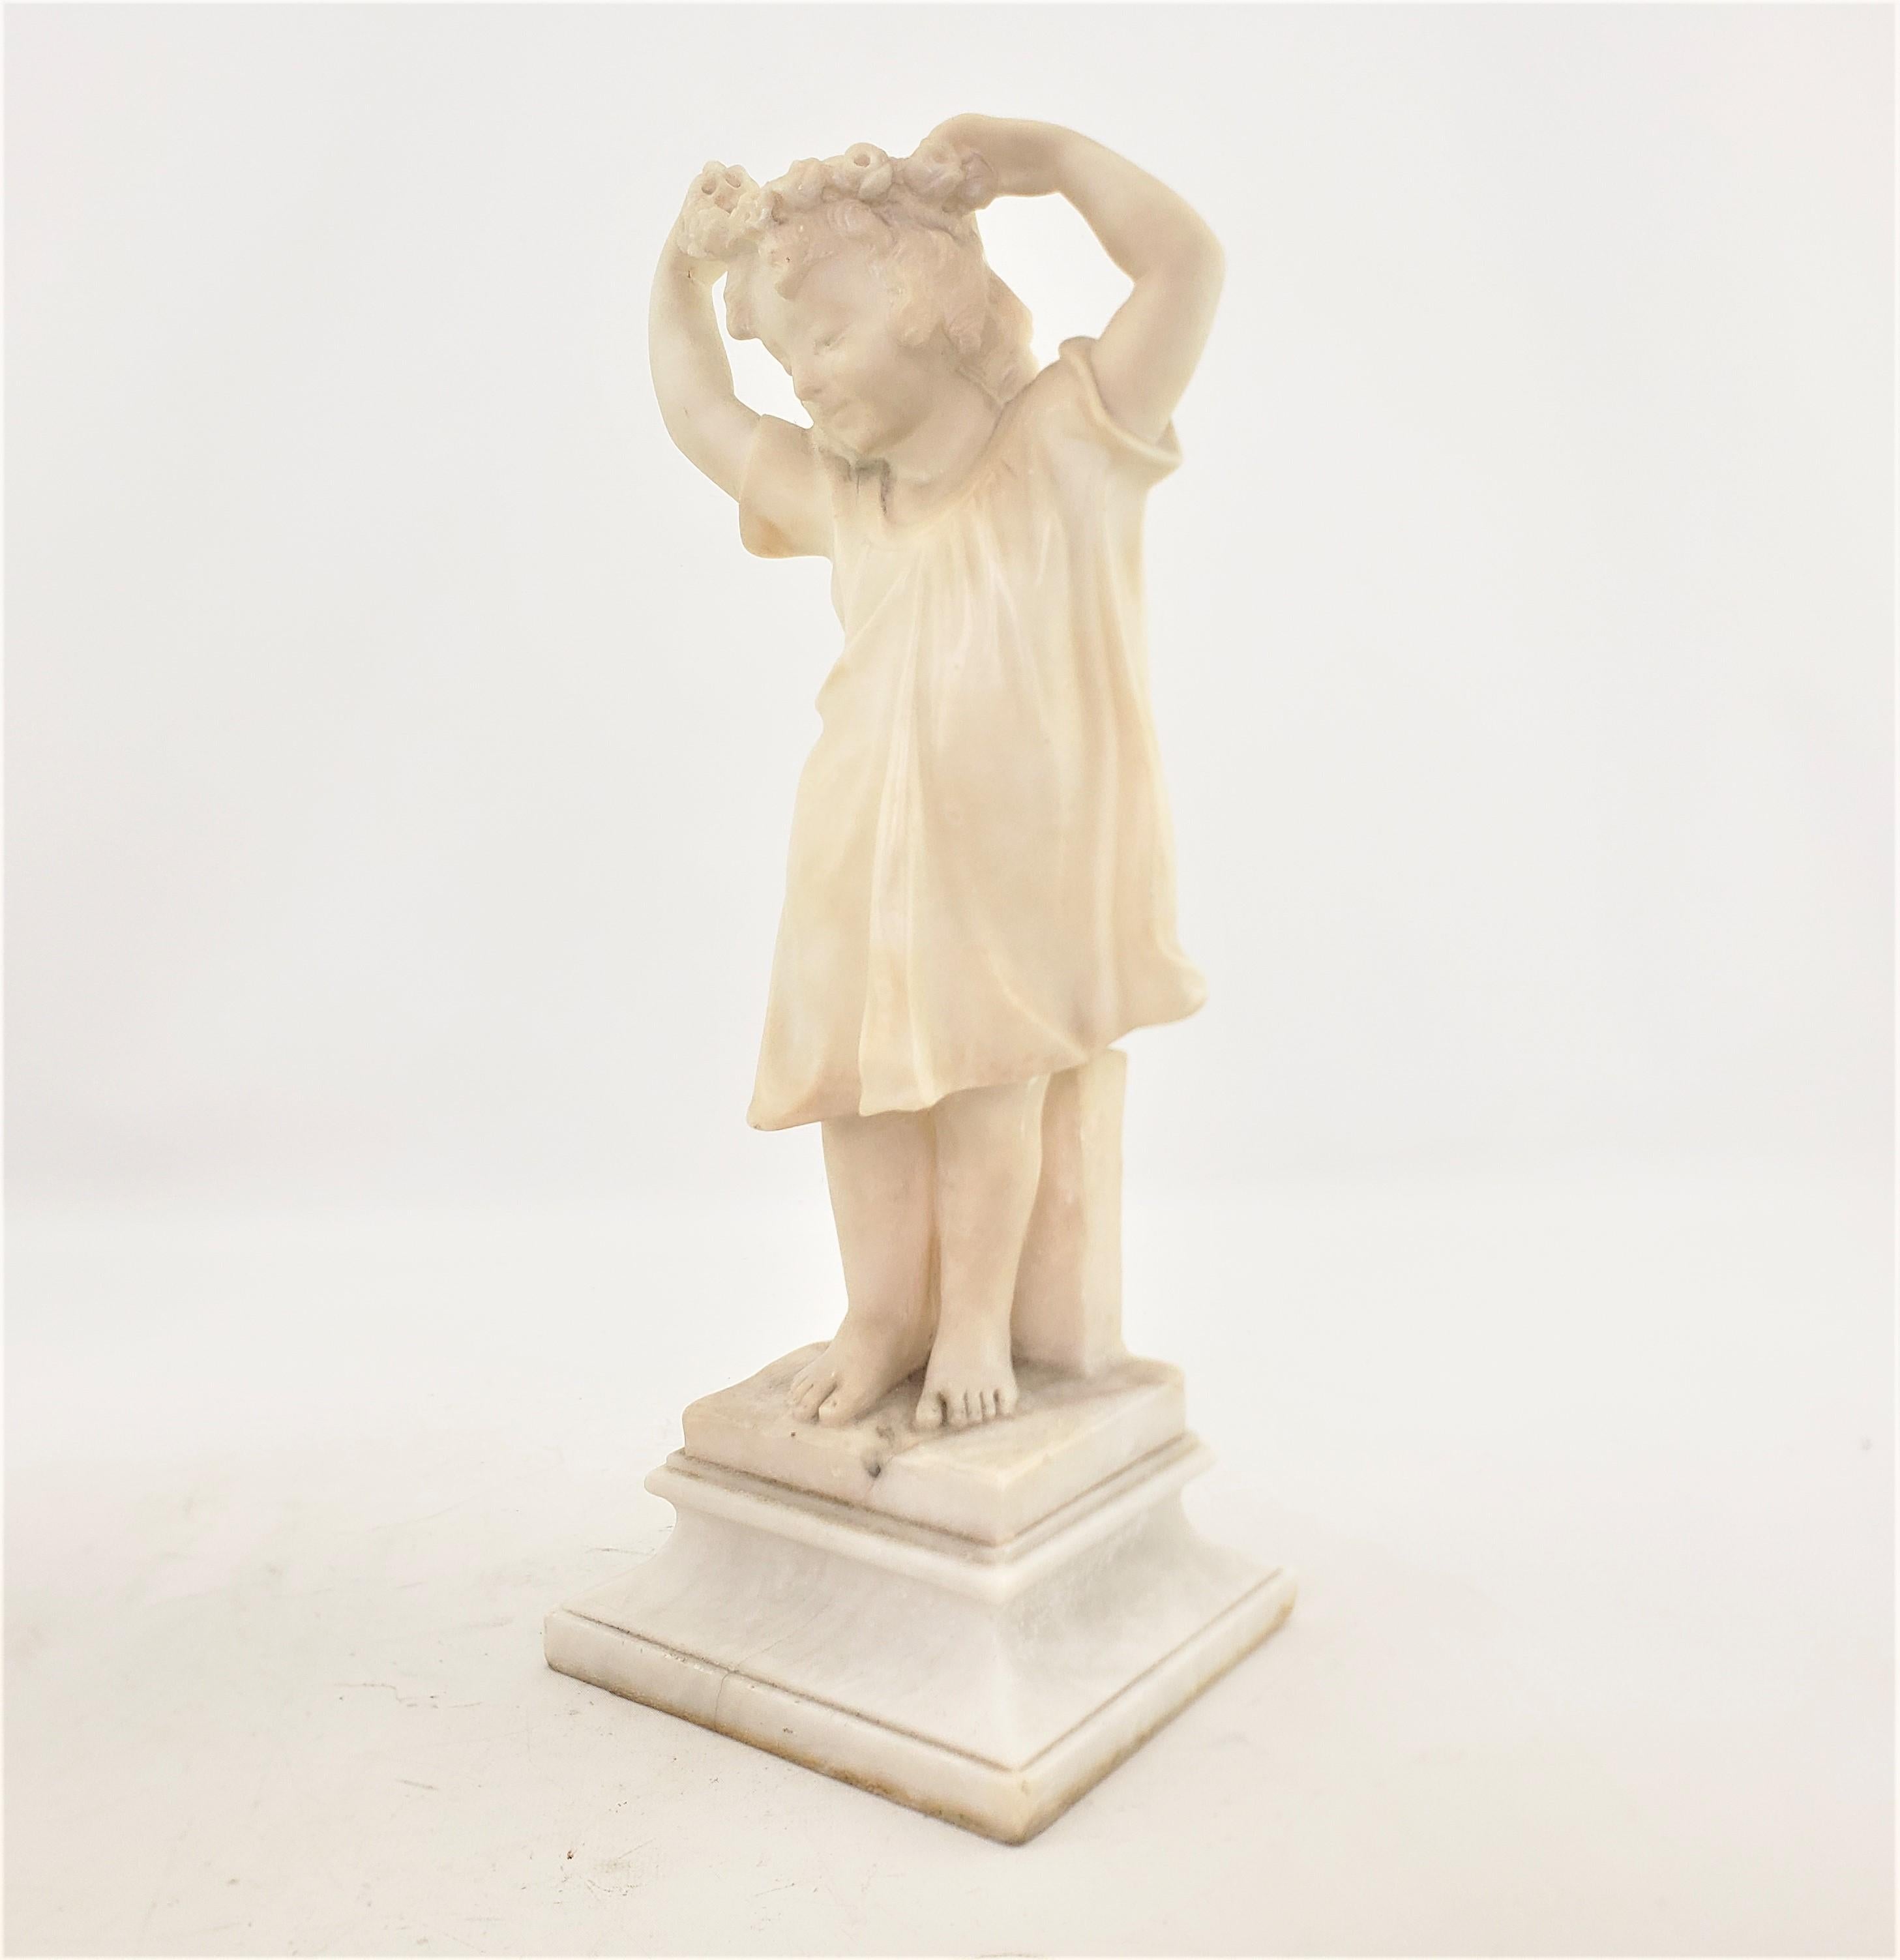 Italian Antique Hand-Carved Alabaster Sculpture of a Young Girl with Flowered Headband